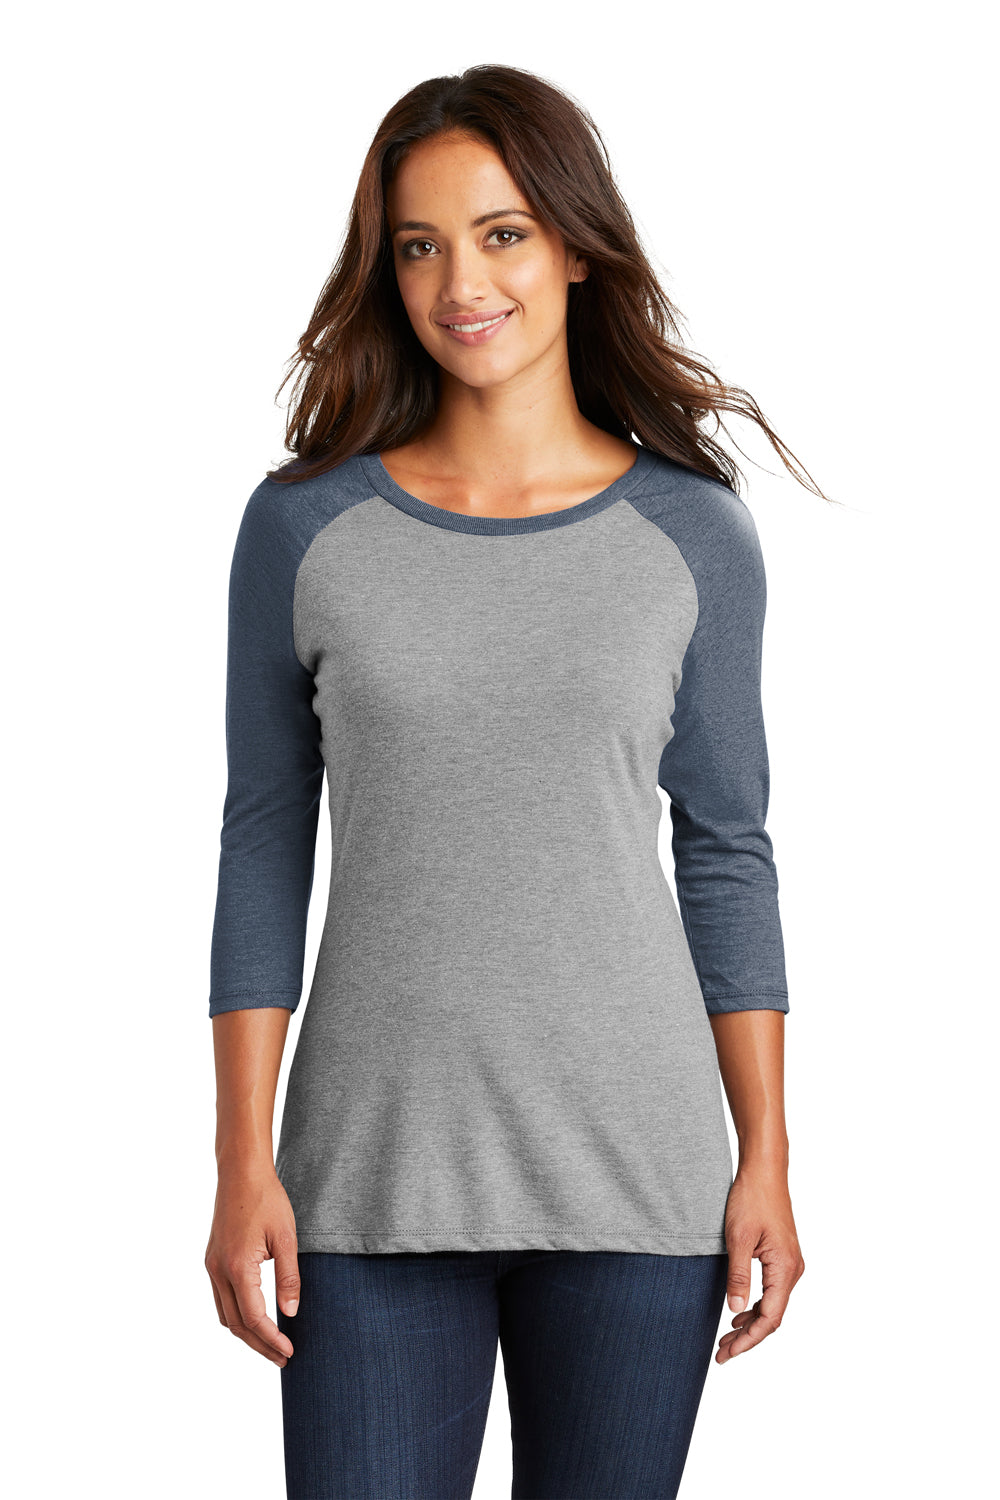 District DM136L Womens Perfect Tri 3/4 Sleeve Crewneck T-Shirt Grey Frost/Navy Blue Front